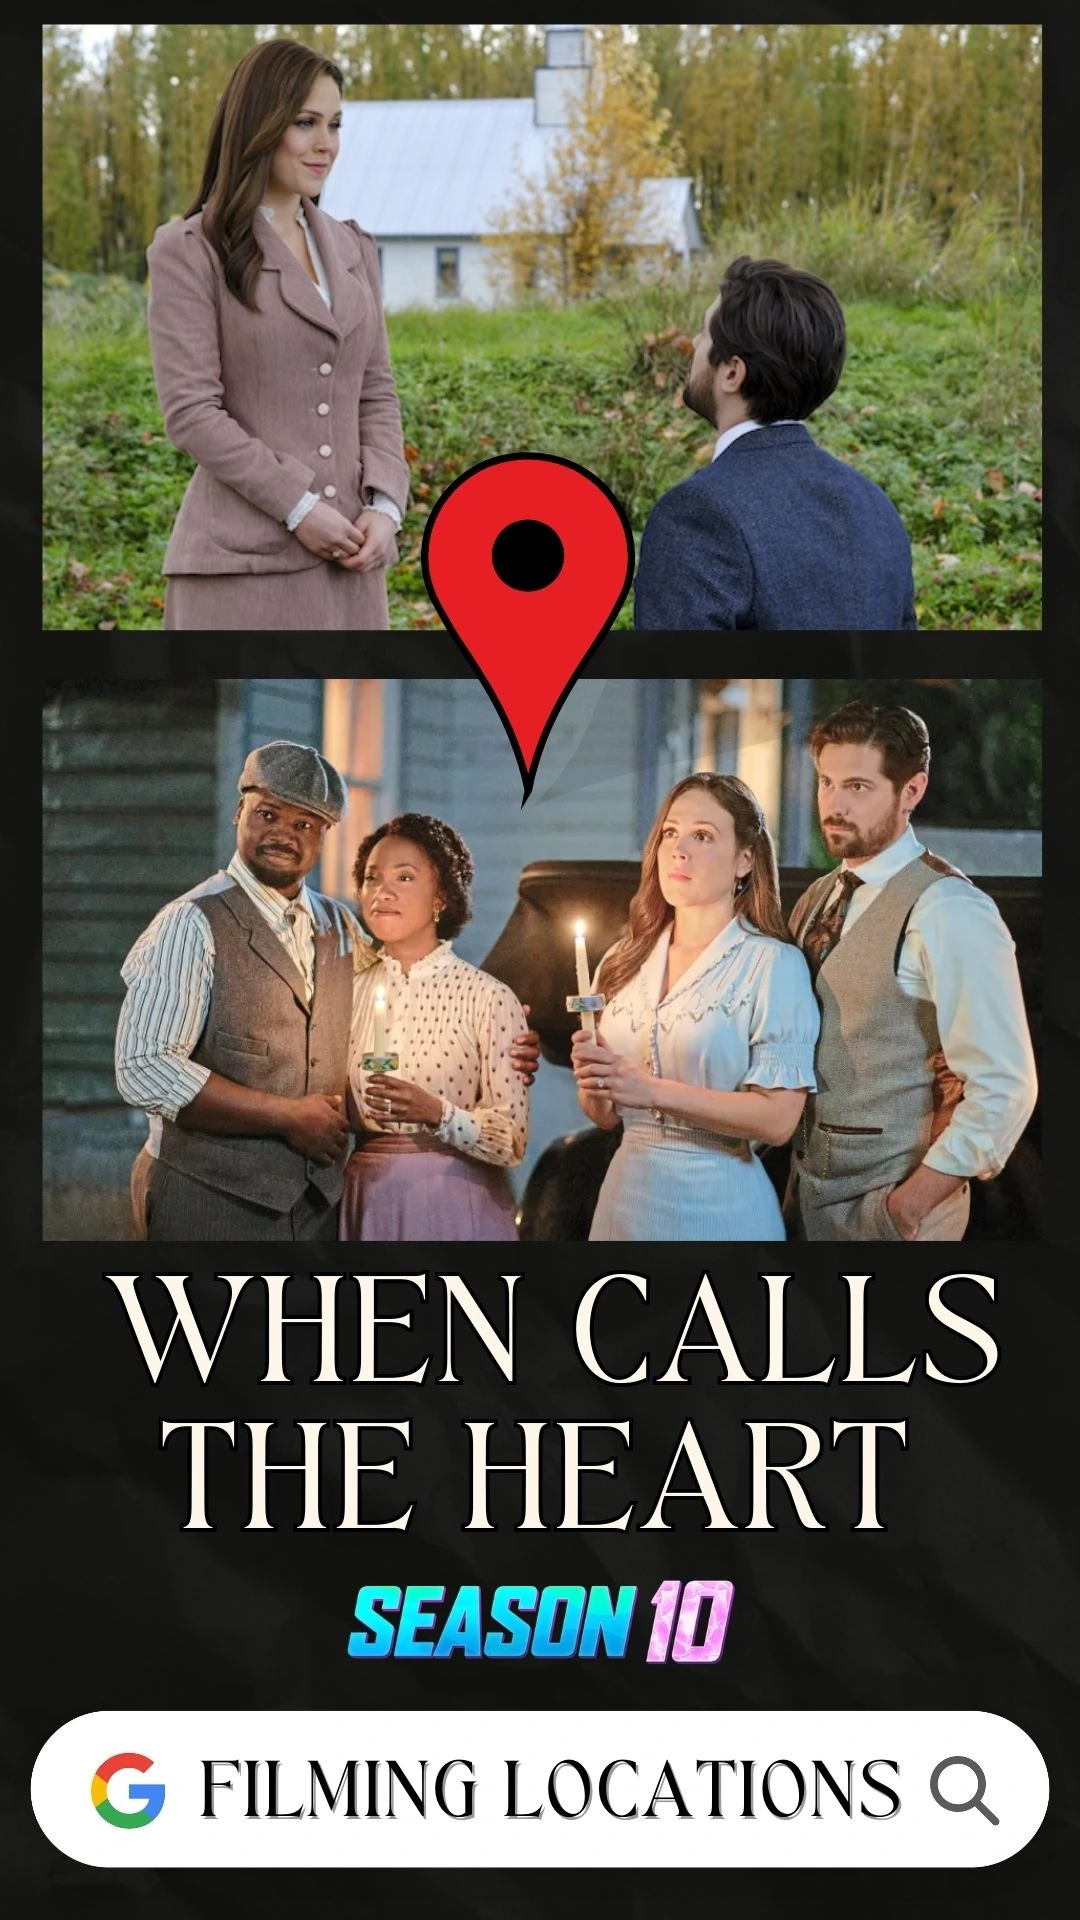 When Calls The Heart Season 10 Filming Locations